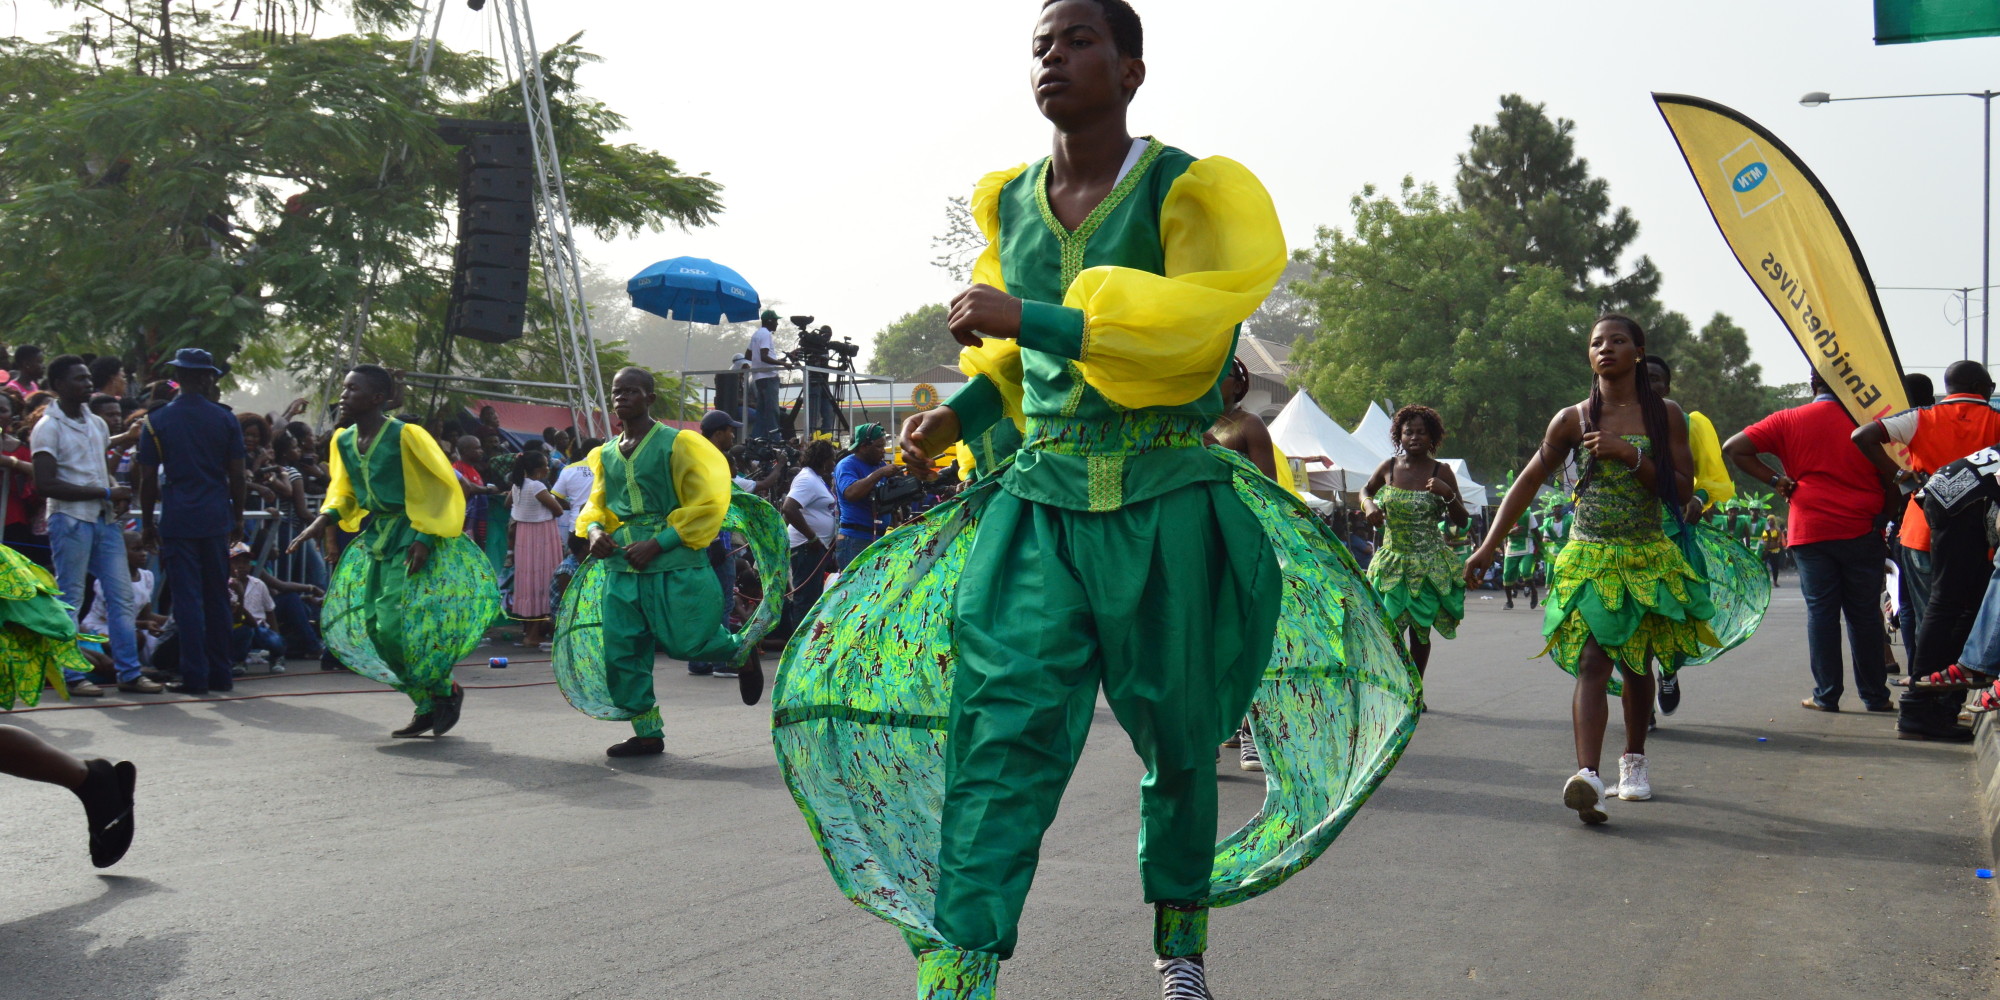 #DiscoverNigeria: Exploring The Calabar Carnival, The Biggest Street Party In Nigeria - Huffington Post UK